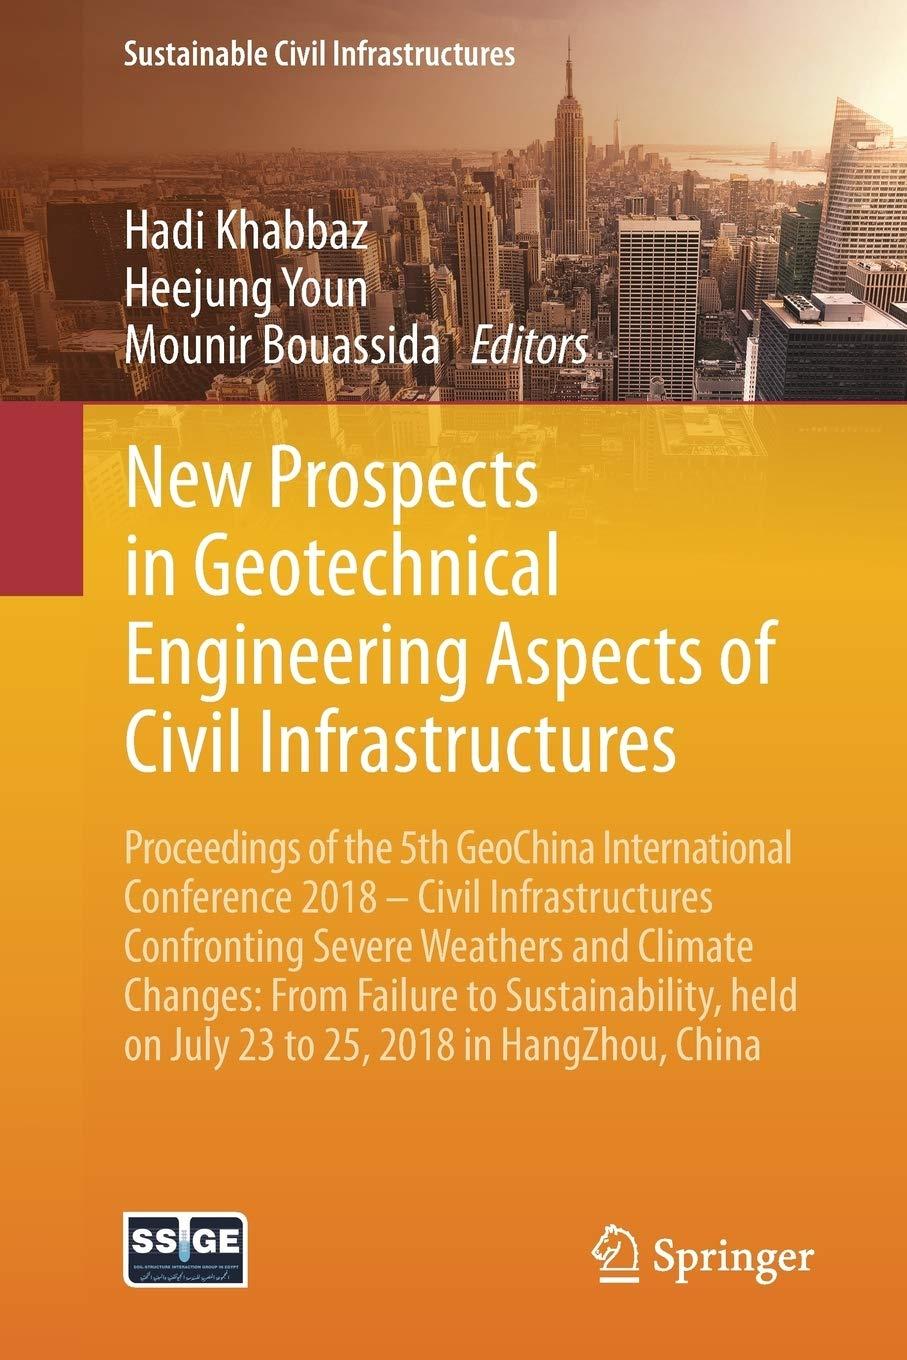 new prospects in geotechnical engineering aspects of civil infrastructures proceedings of the 5th geochina